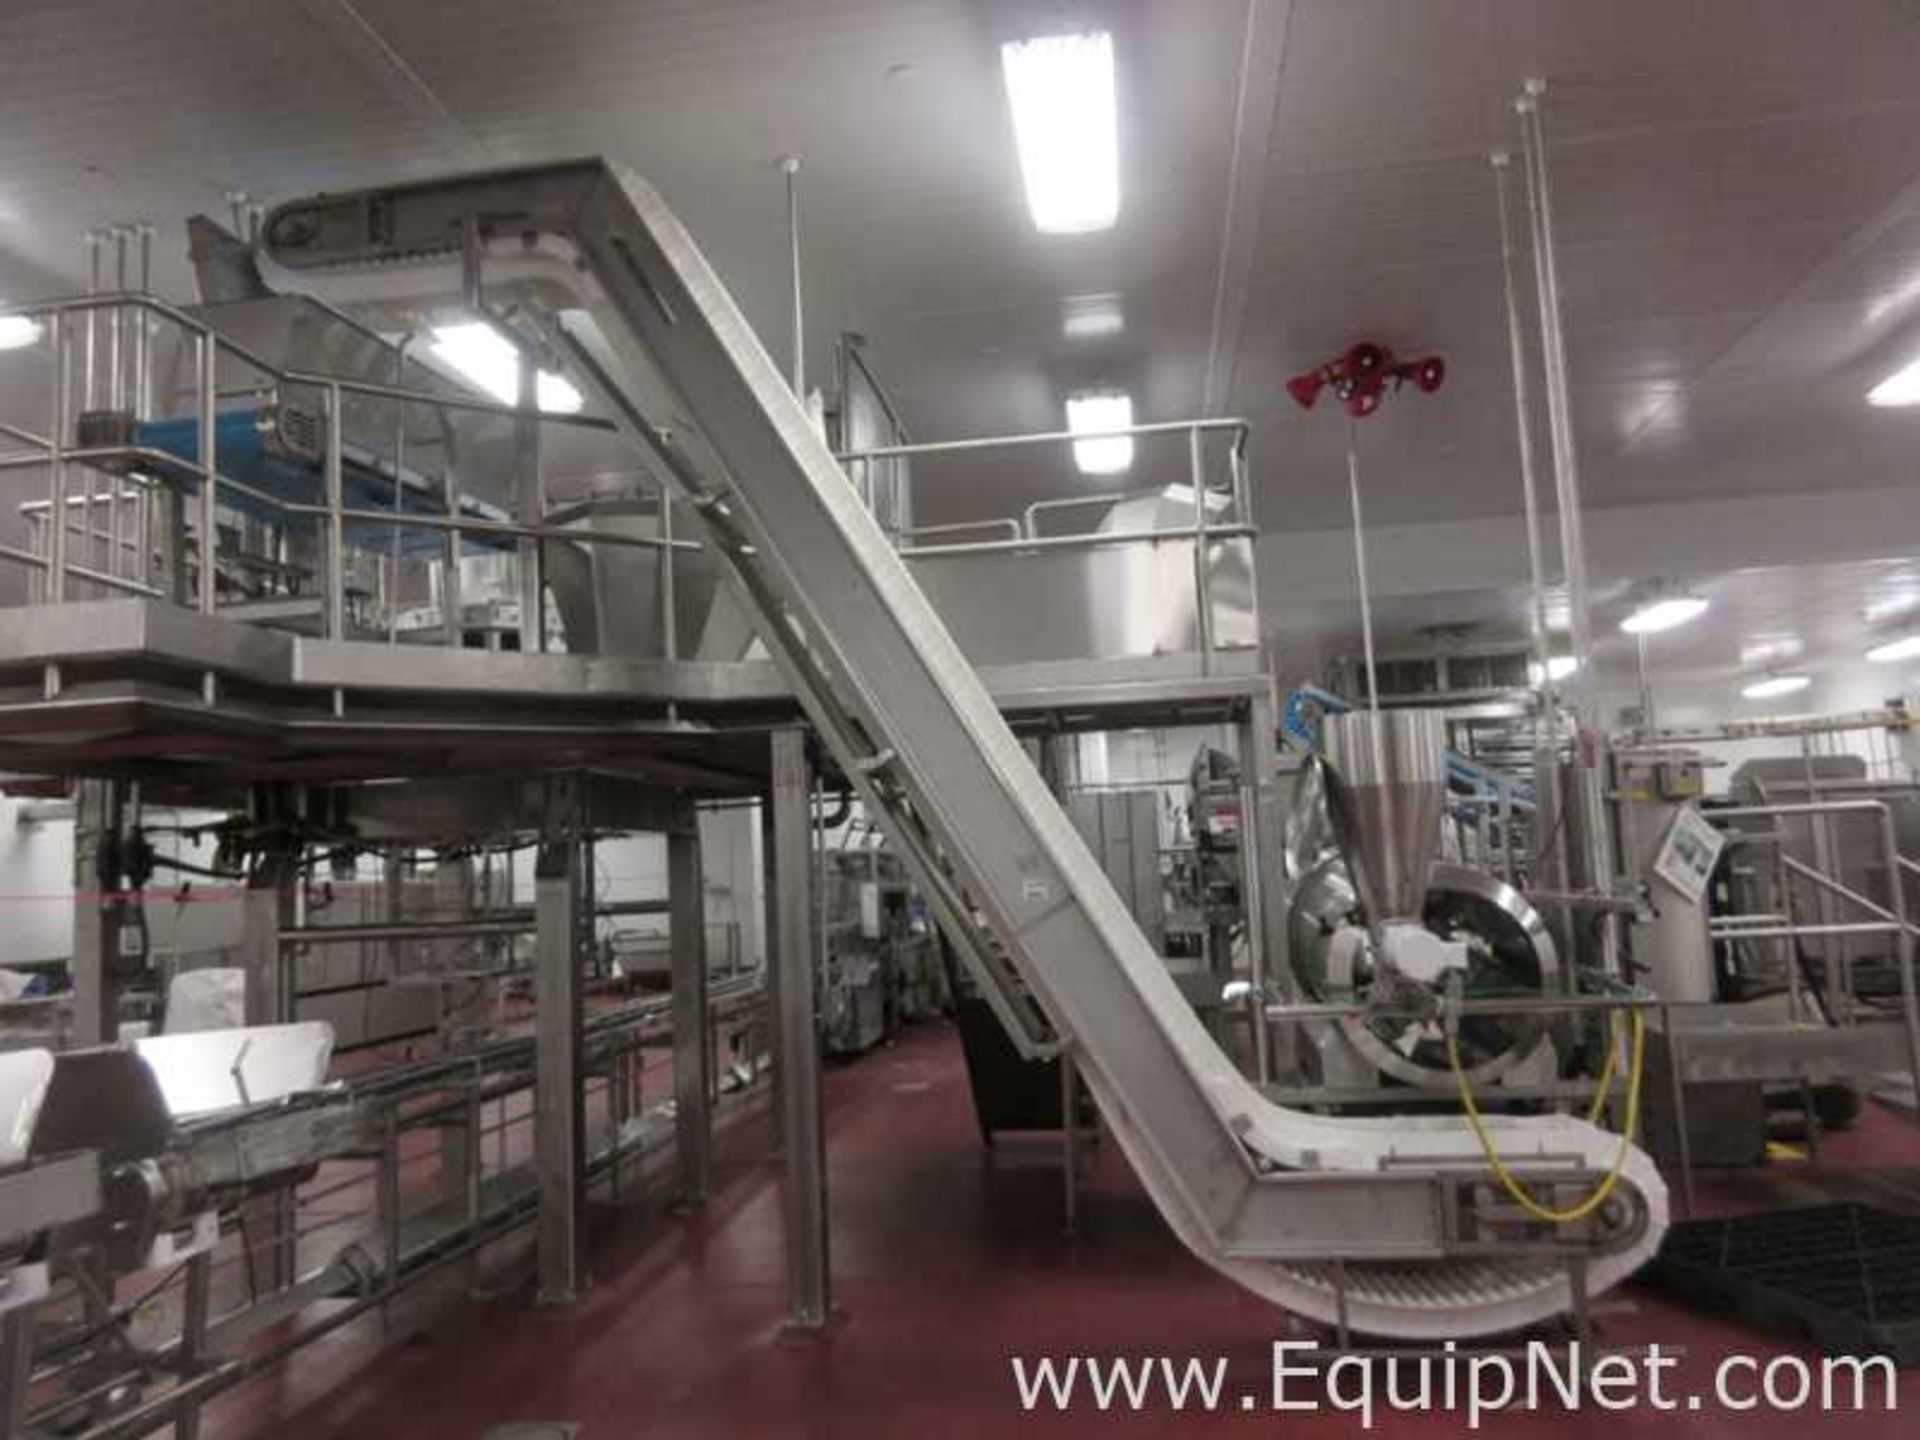 Incline Z Style Food Grade Conveyor Approx. 20 Foot High